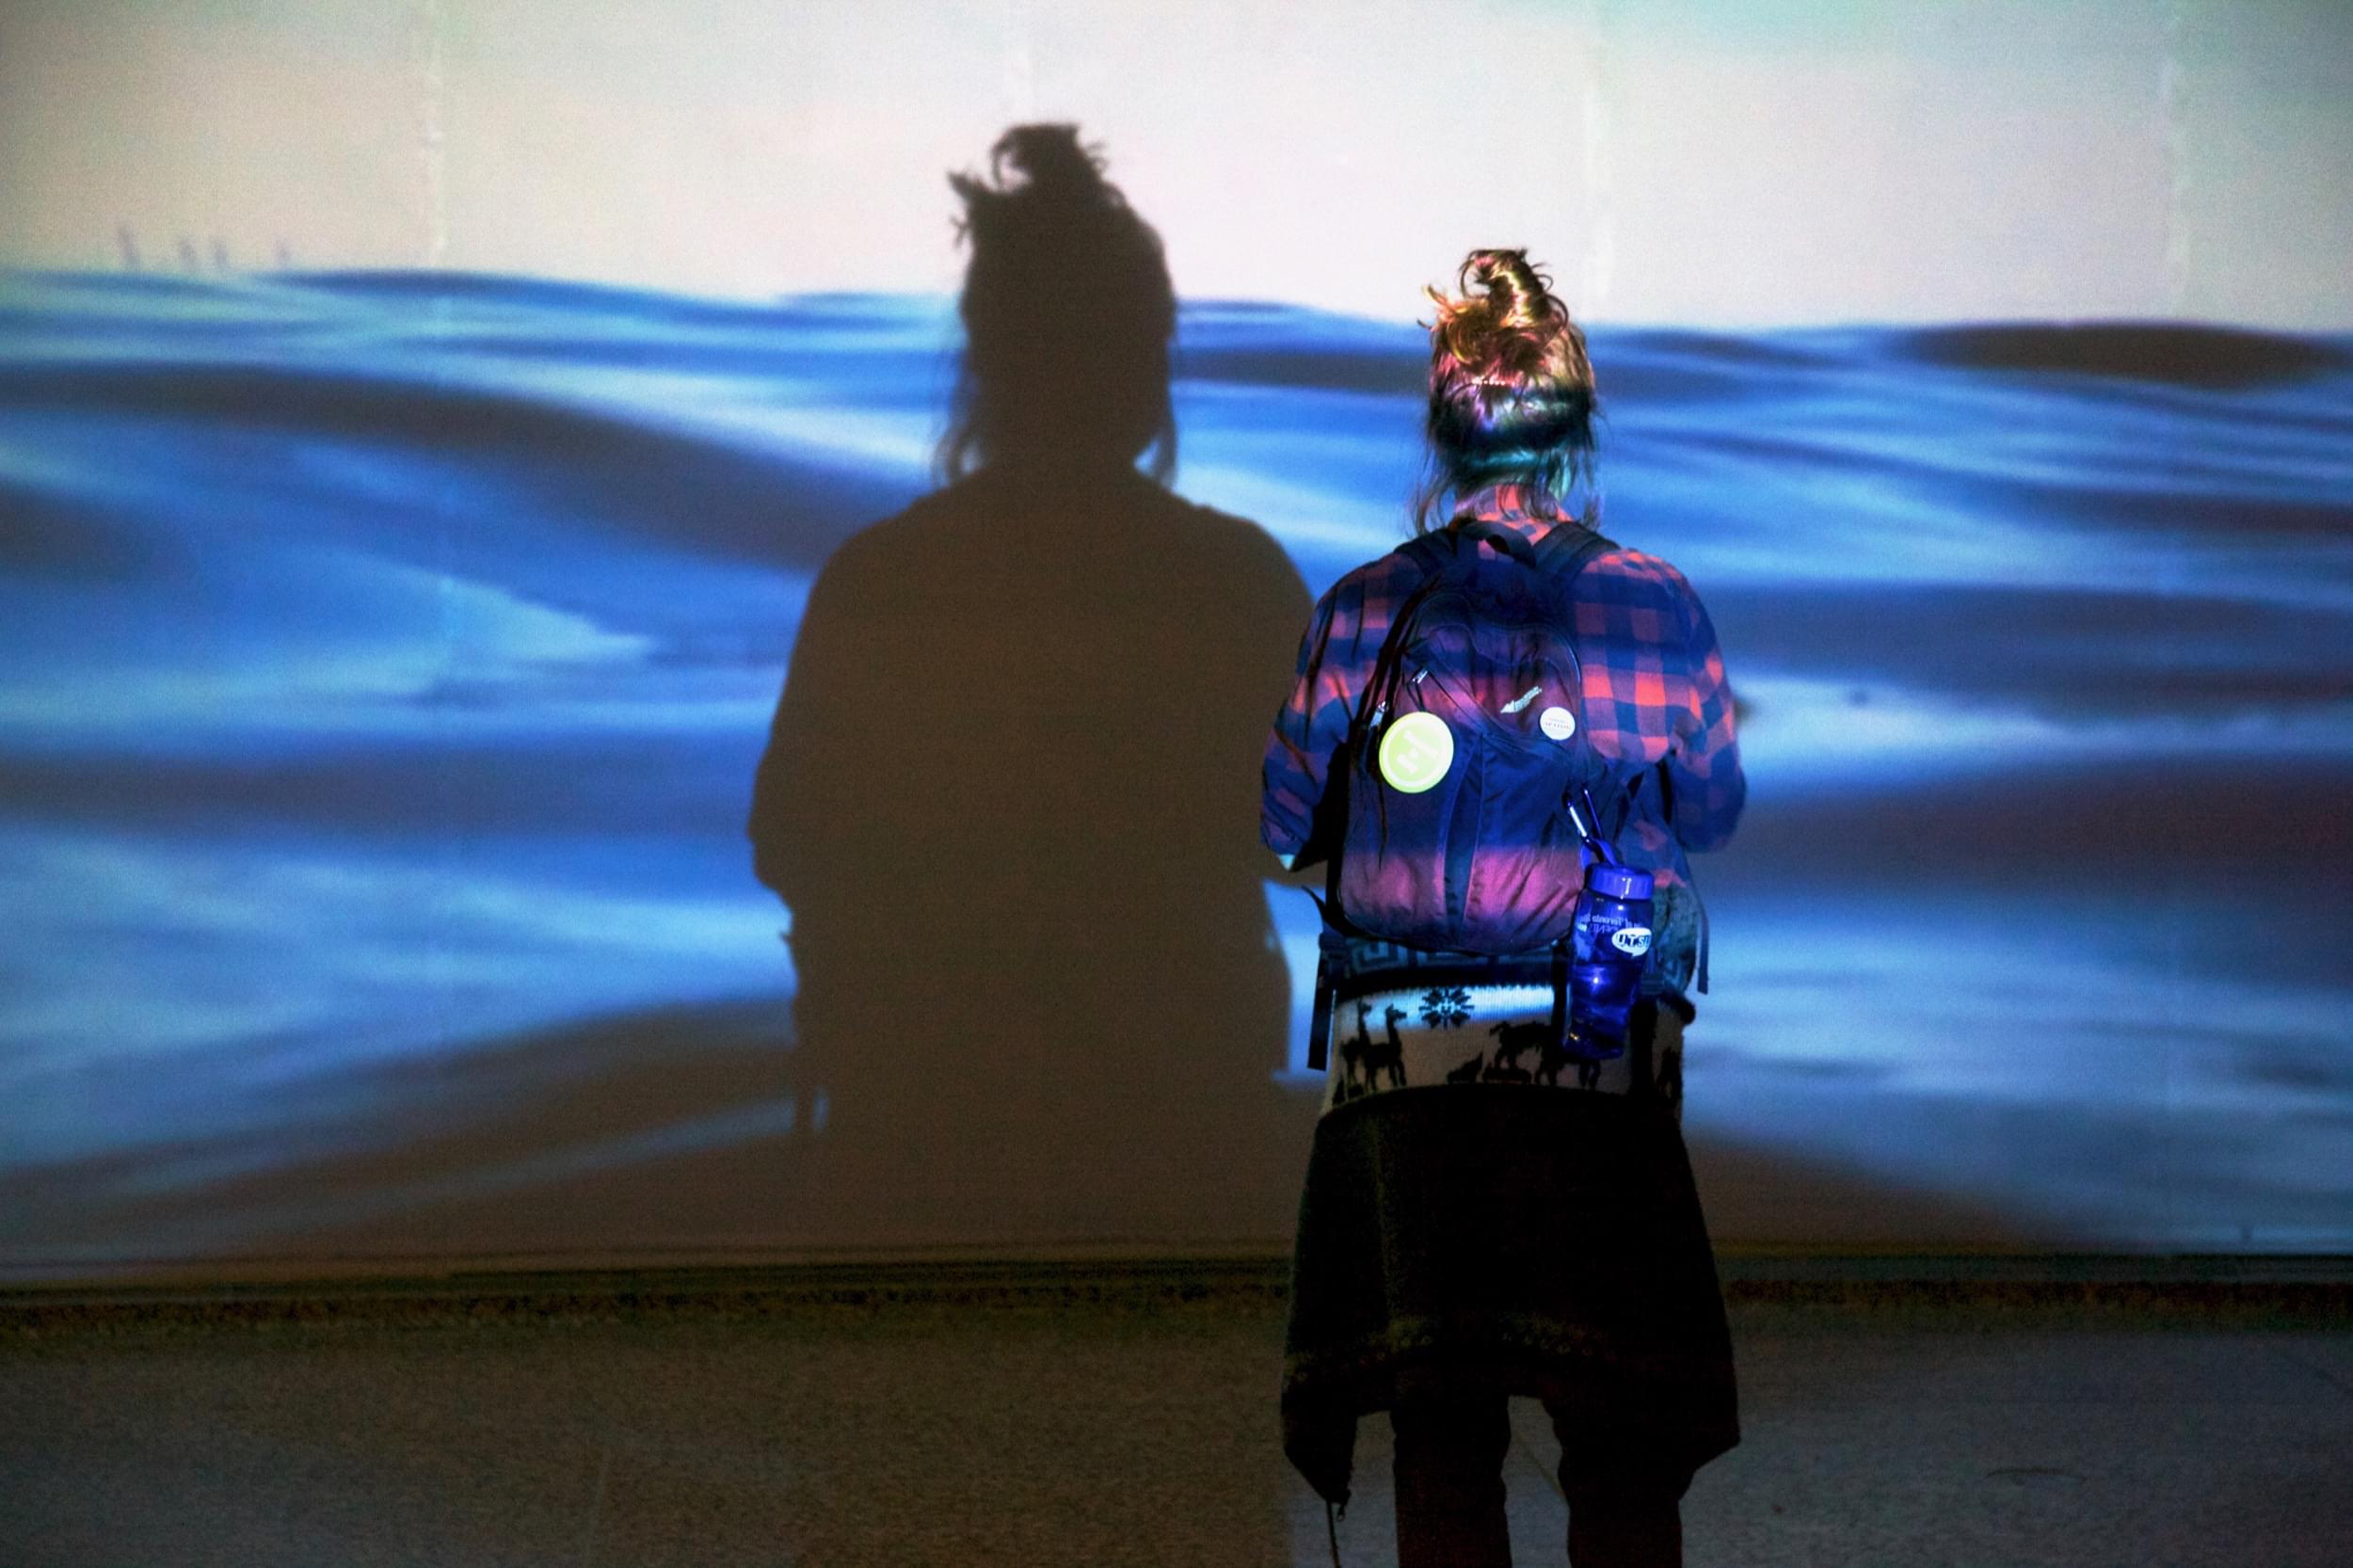 Small thumbnail image of Photograph of the back of a seemingly teenage girl wearing a backpack staring at the life-size projection of water in front of her. We see her shadow in the projection of the water.